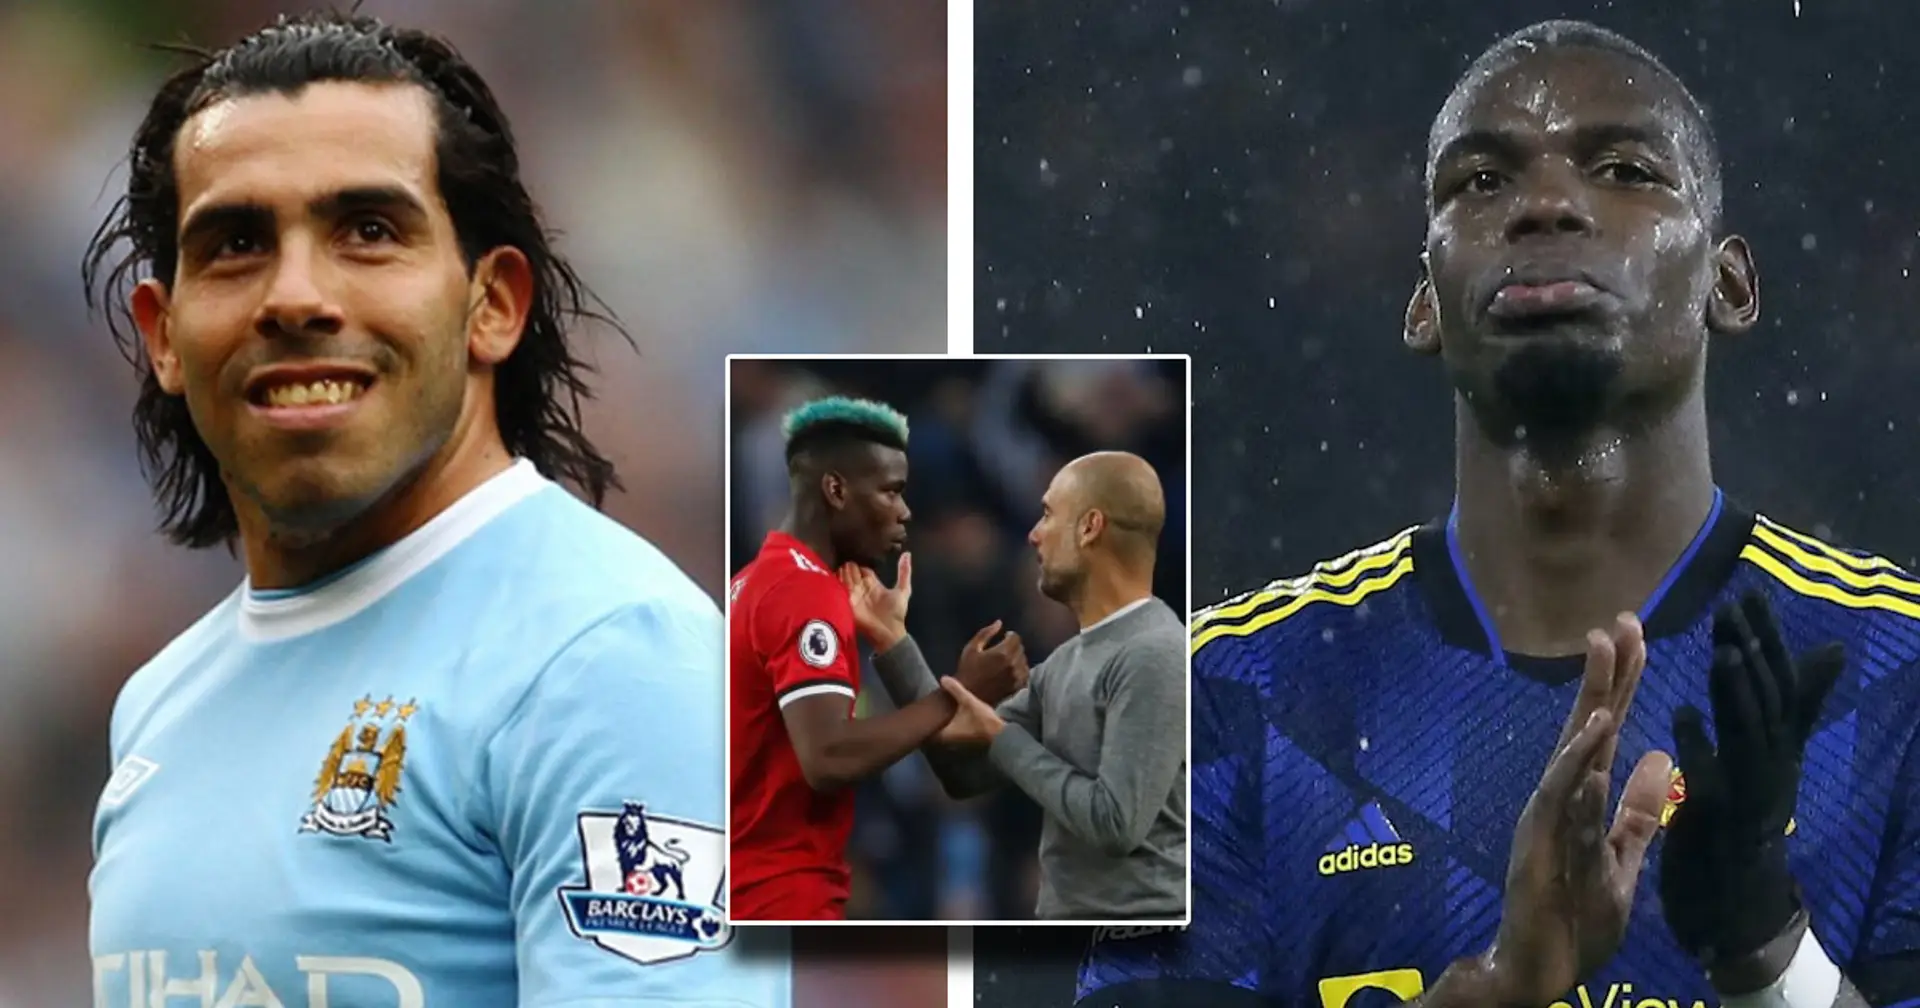 Paul Pogba linked with 'Carlos Tevez-style' move to Manchester City (reliability: 4 stars)